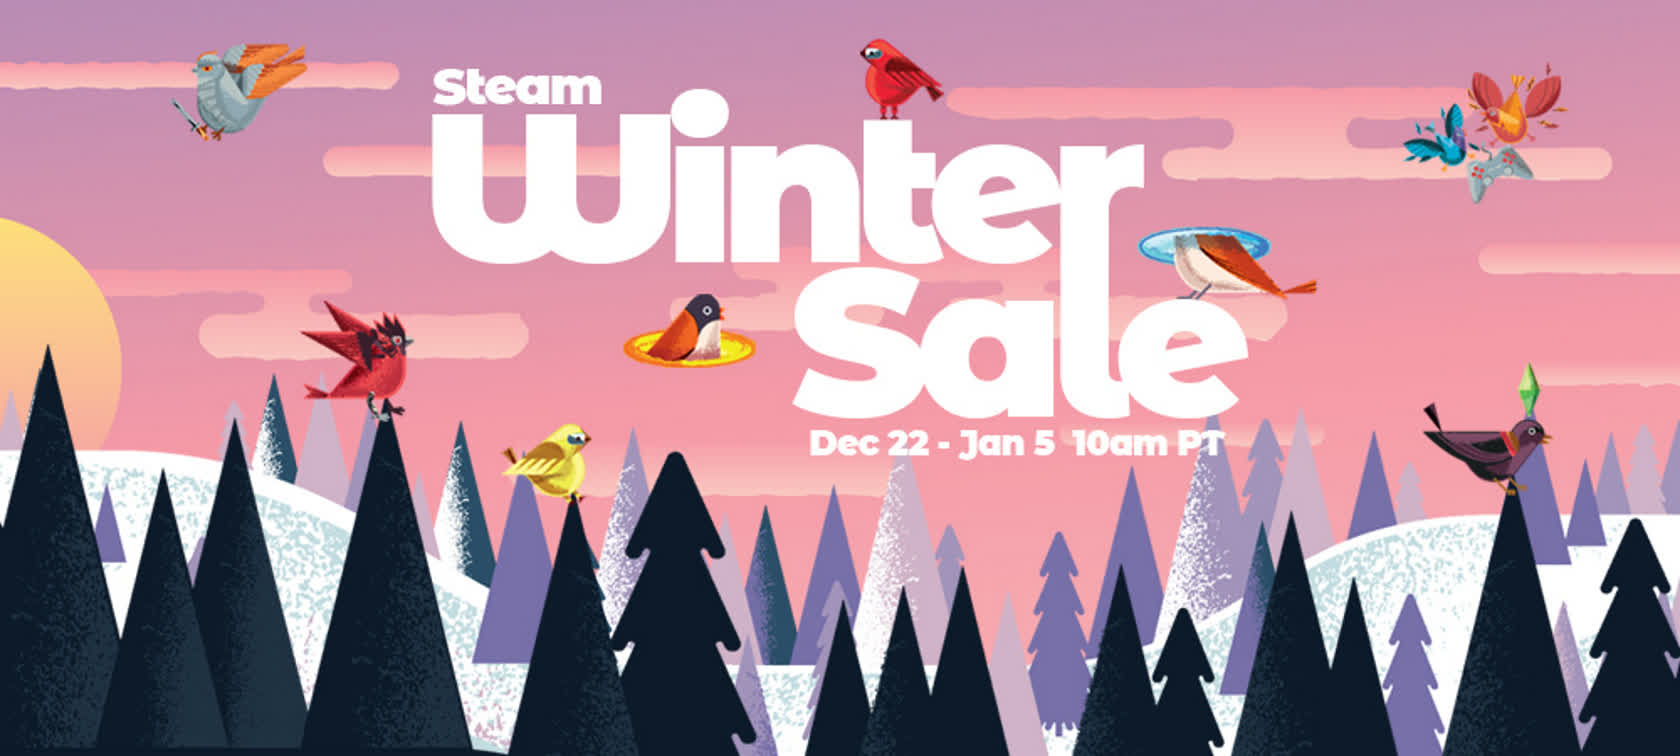 Steam's 2020 Winter Sale is now live